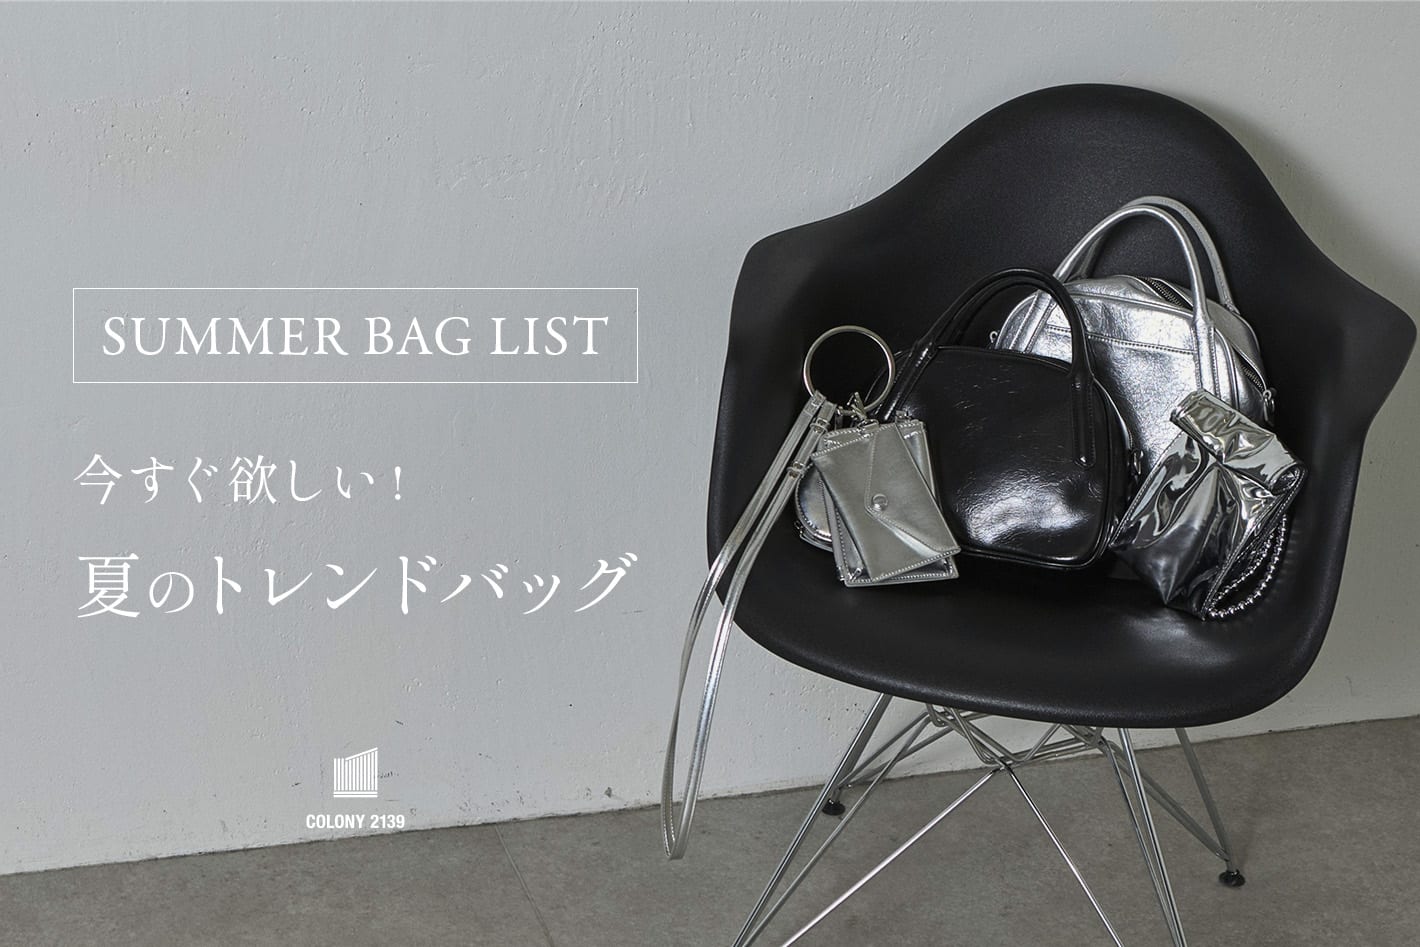 COLONY 2139 【New Summer Bag】今すぐほしいバッグ特集！